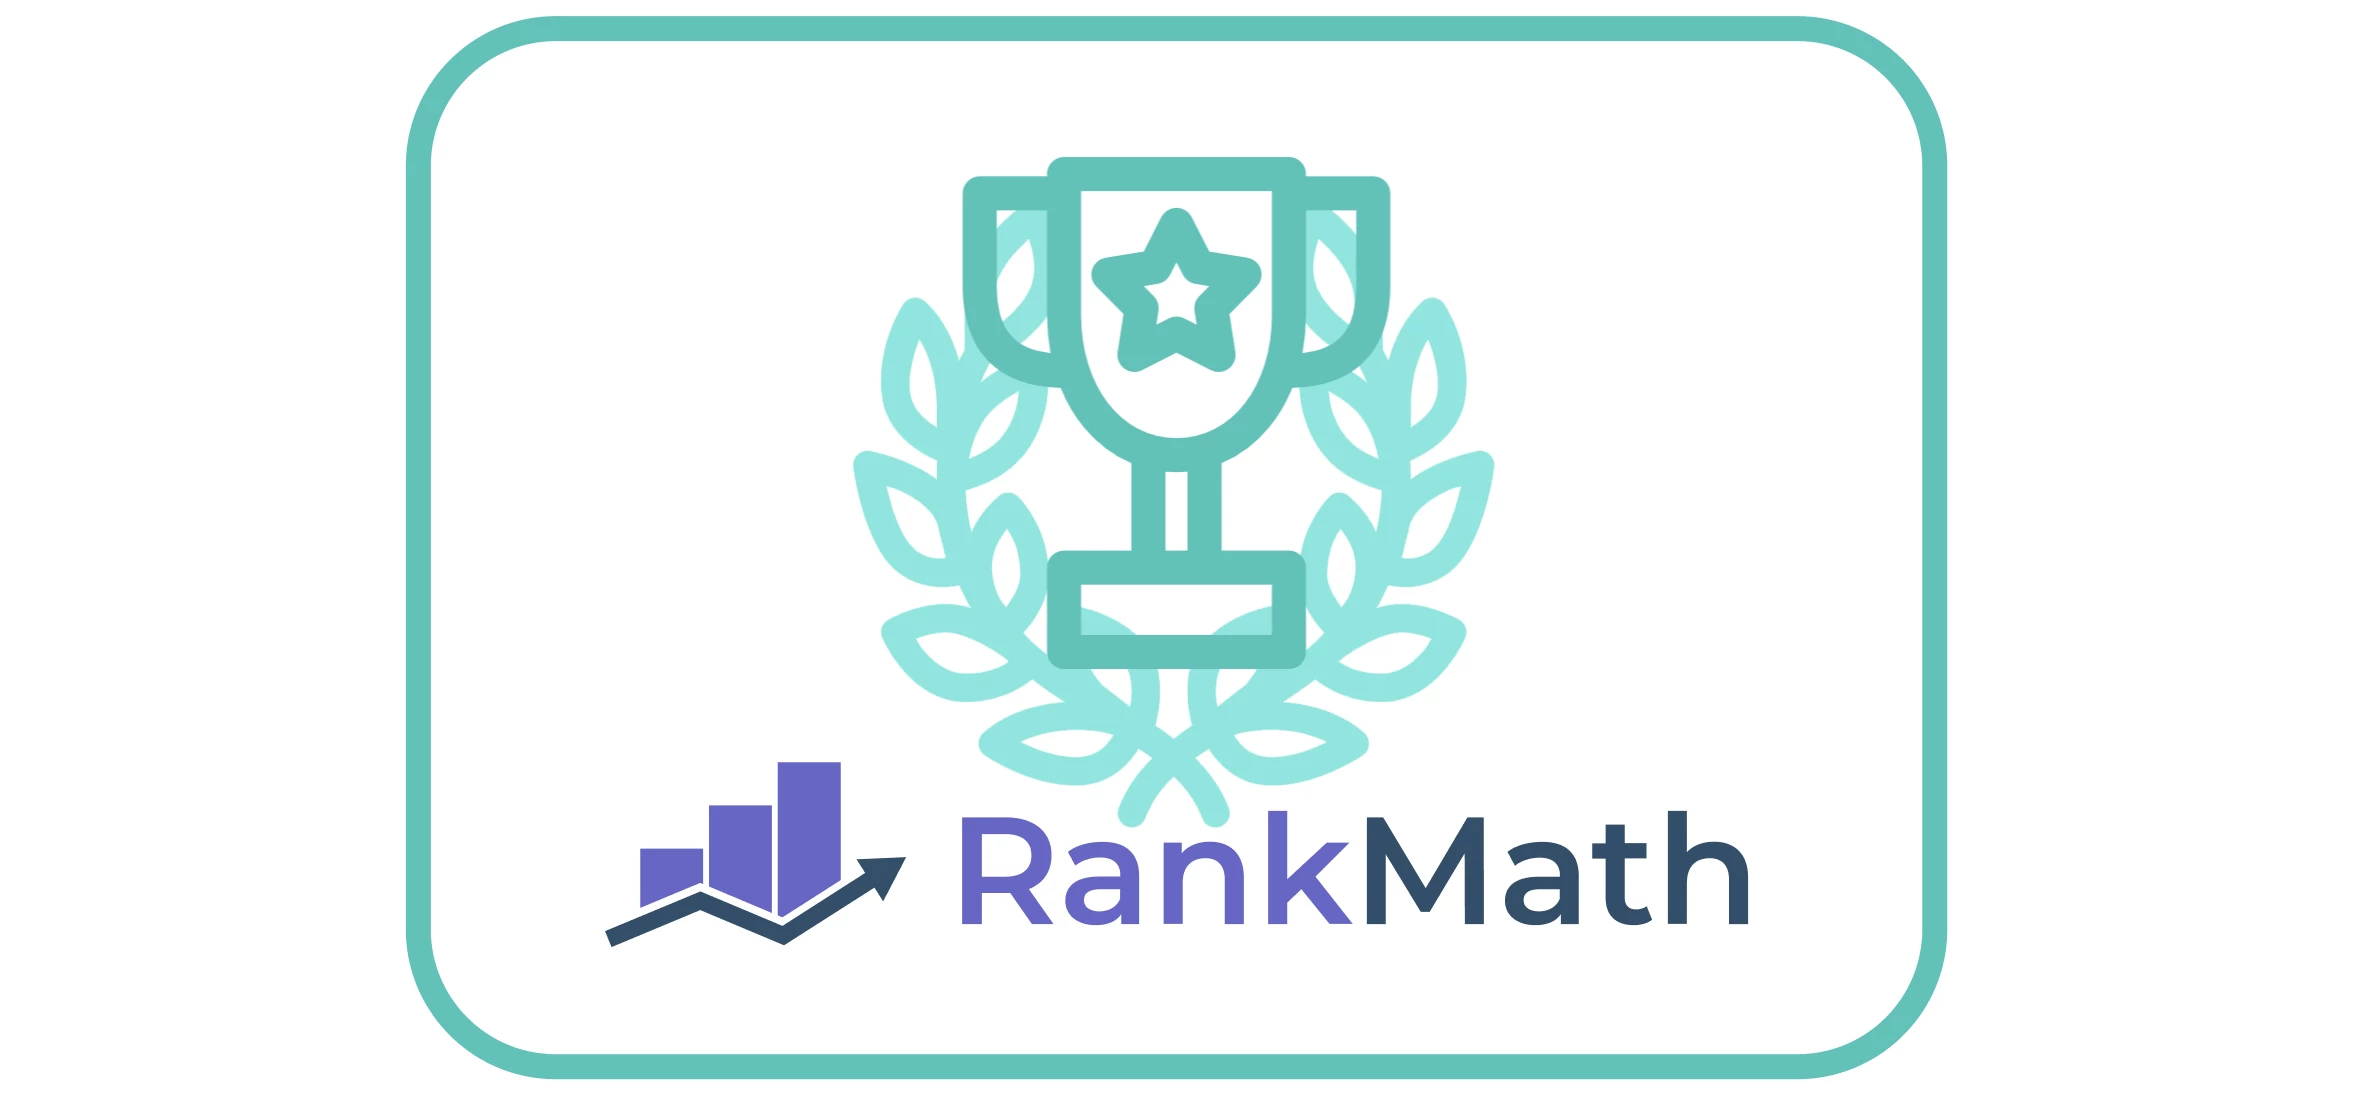 Rank Math has scored the highest number of points.